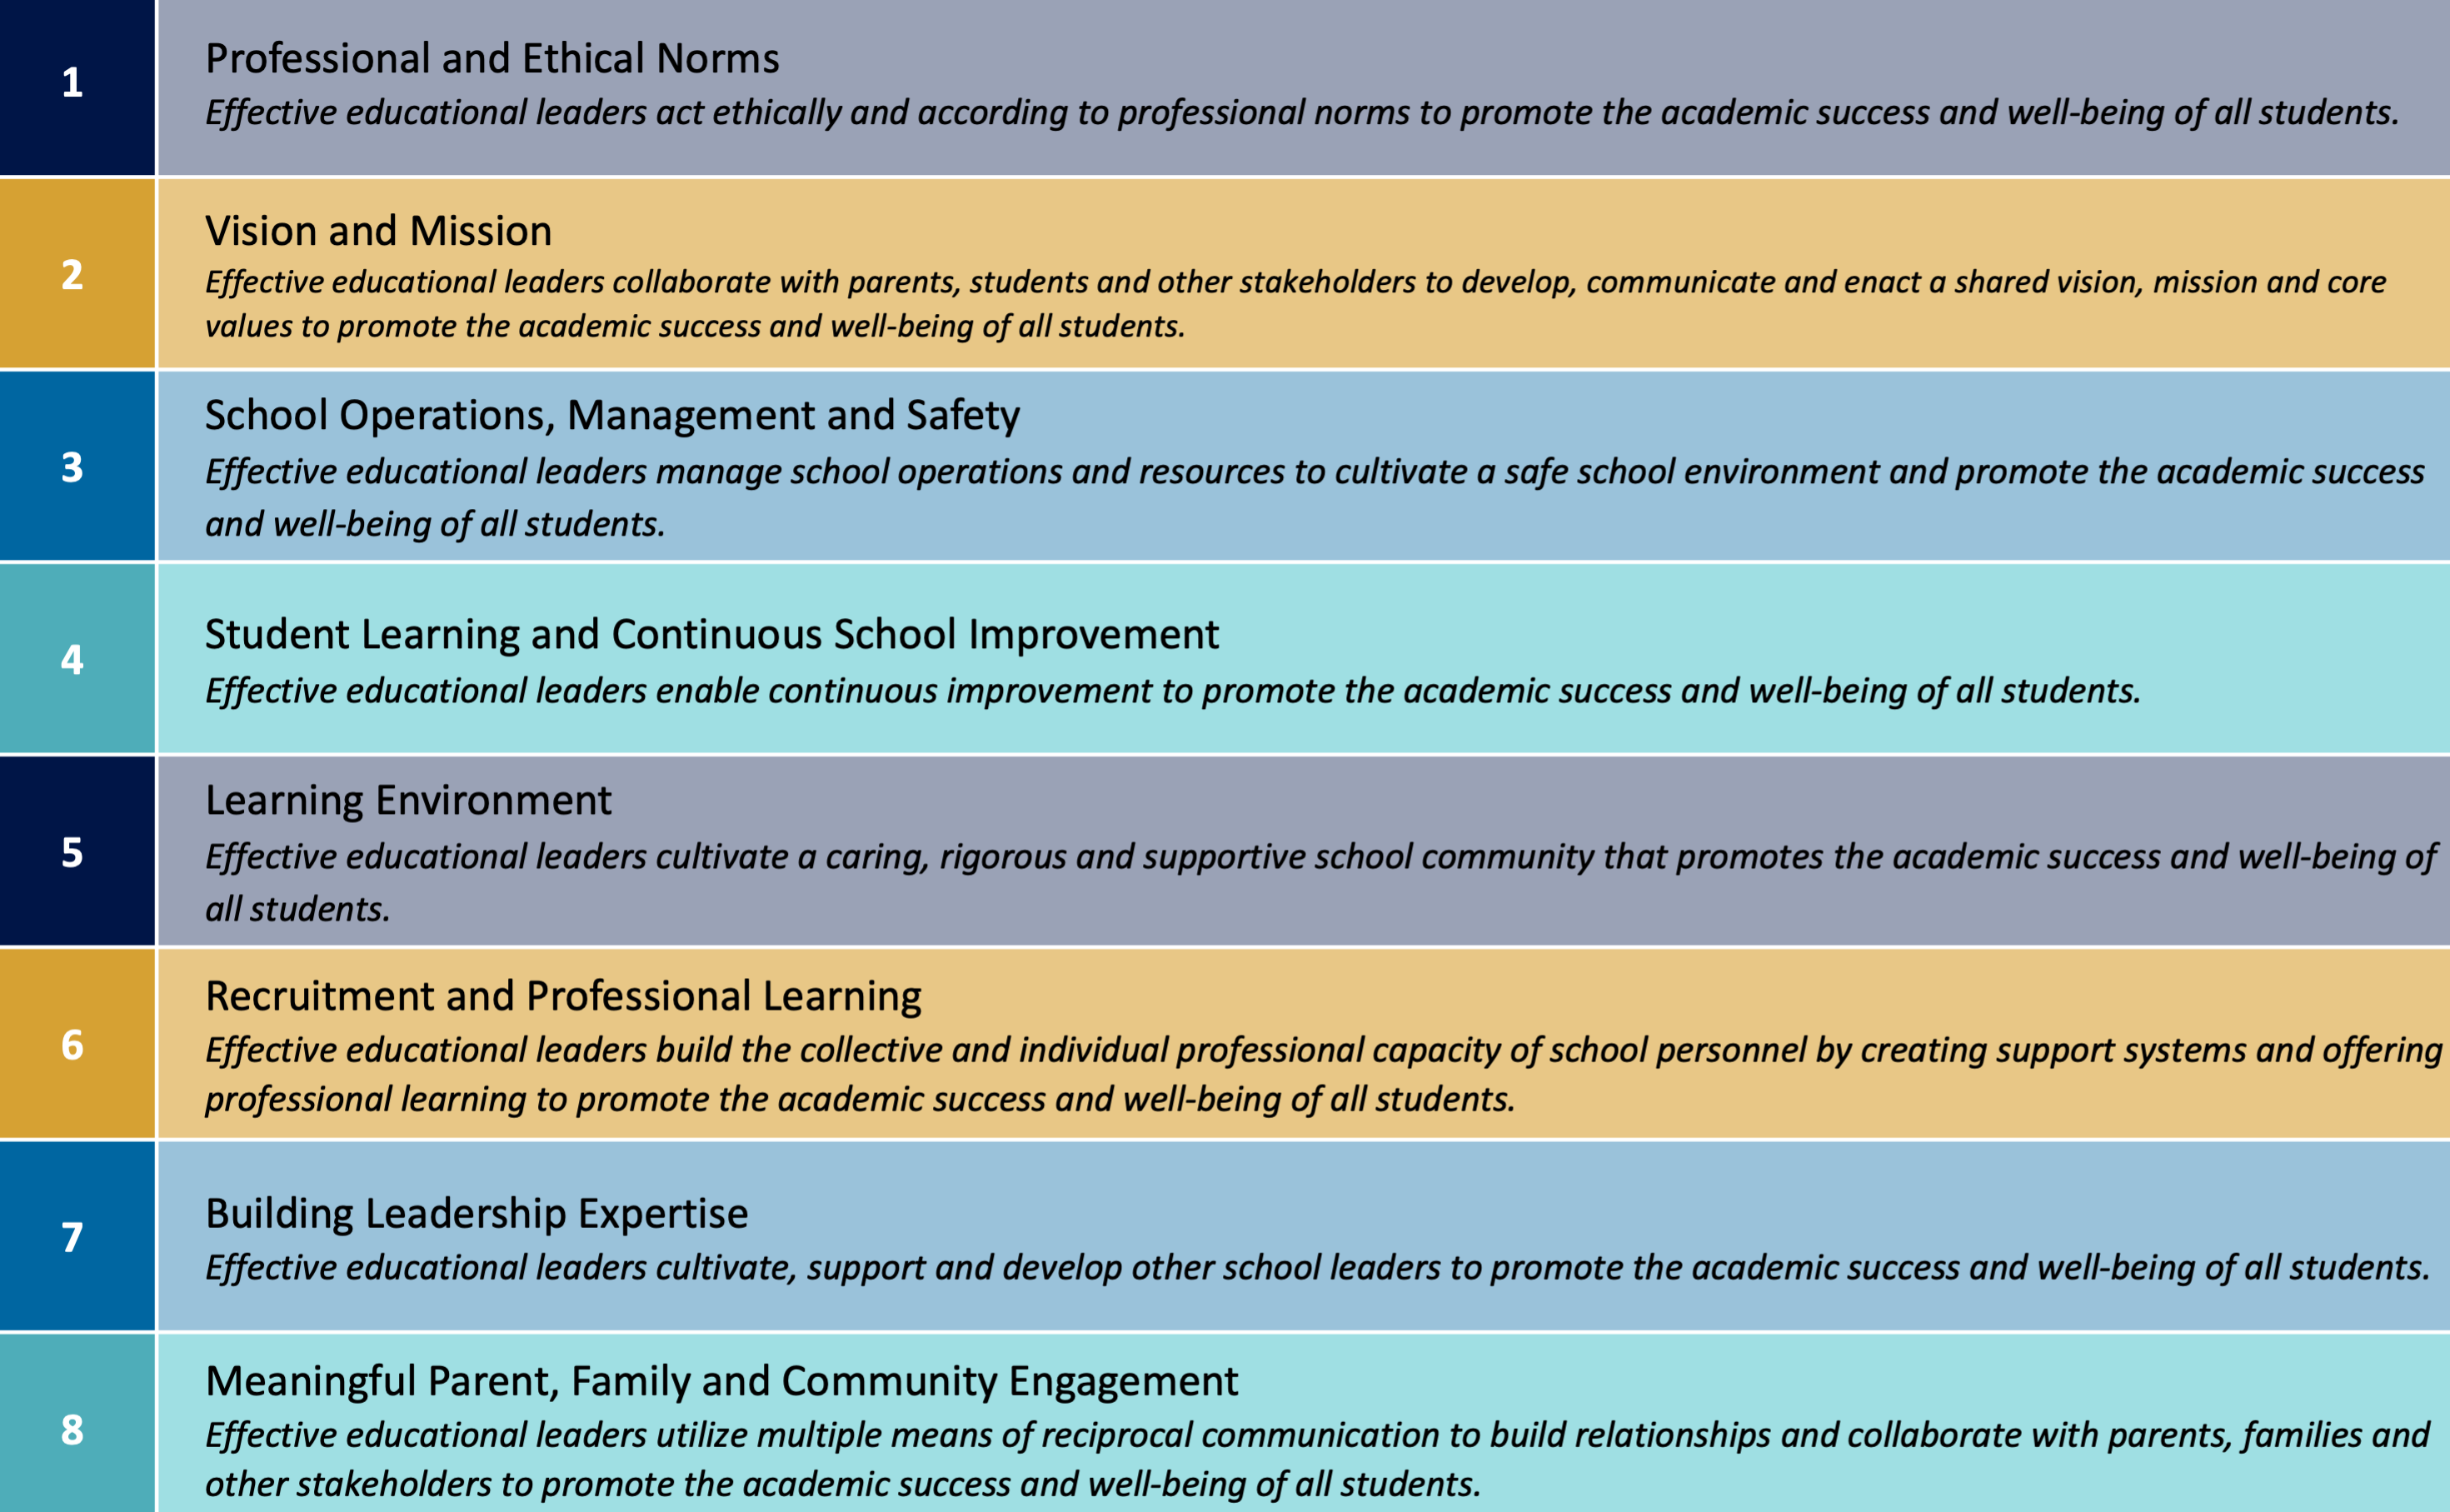 Standards Overview Professional and Ethical Norms: Effective educational leaders act ethically and according to professional norms to promote the academic success and well-being of all students. Vision and Mission: Effective educational leaders collaborate with parents, students and other stakeholders to develop, communicate and enact a shared vision, mission and core values to promote the academic success and well-being of all students. School Operations, Management and Safety: Effective educational leaders manage school operations and resources to cultivate a safe school environment and promote the academic success and well-being of all students. Student Learning and Continuous School Improvement: Effective educational leaders enable continuous improvement to promote the academic success and well-being of all students. Learning Environment: Effective educational leaders cultivate a caring, rigorous and supportive school community that promotes the academic success and well-being of all students. Recruitment and Professional Learning: Effective educational leaders build the collective and individual professional capacity of school personnel by creating support systems and offering professional learning to promote the academic success and well-being of all students. Building leadership Expertise: Effective educational leaders cultivate, support and develop other school leaders to promote the academic success and well-being of all students. Meaningful Parent, Family and Community Engagement: Effective educational leaders utilize multiple means of reciprocal communication to build relationships and collaborate with parents, families and other stakeholders to promote the academic success and well-being of all students.